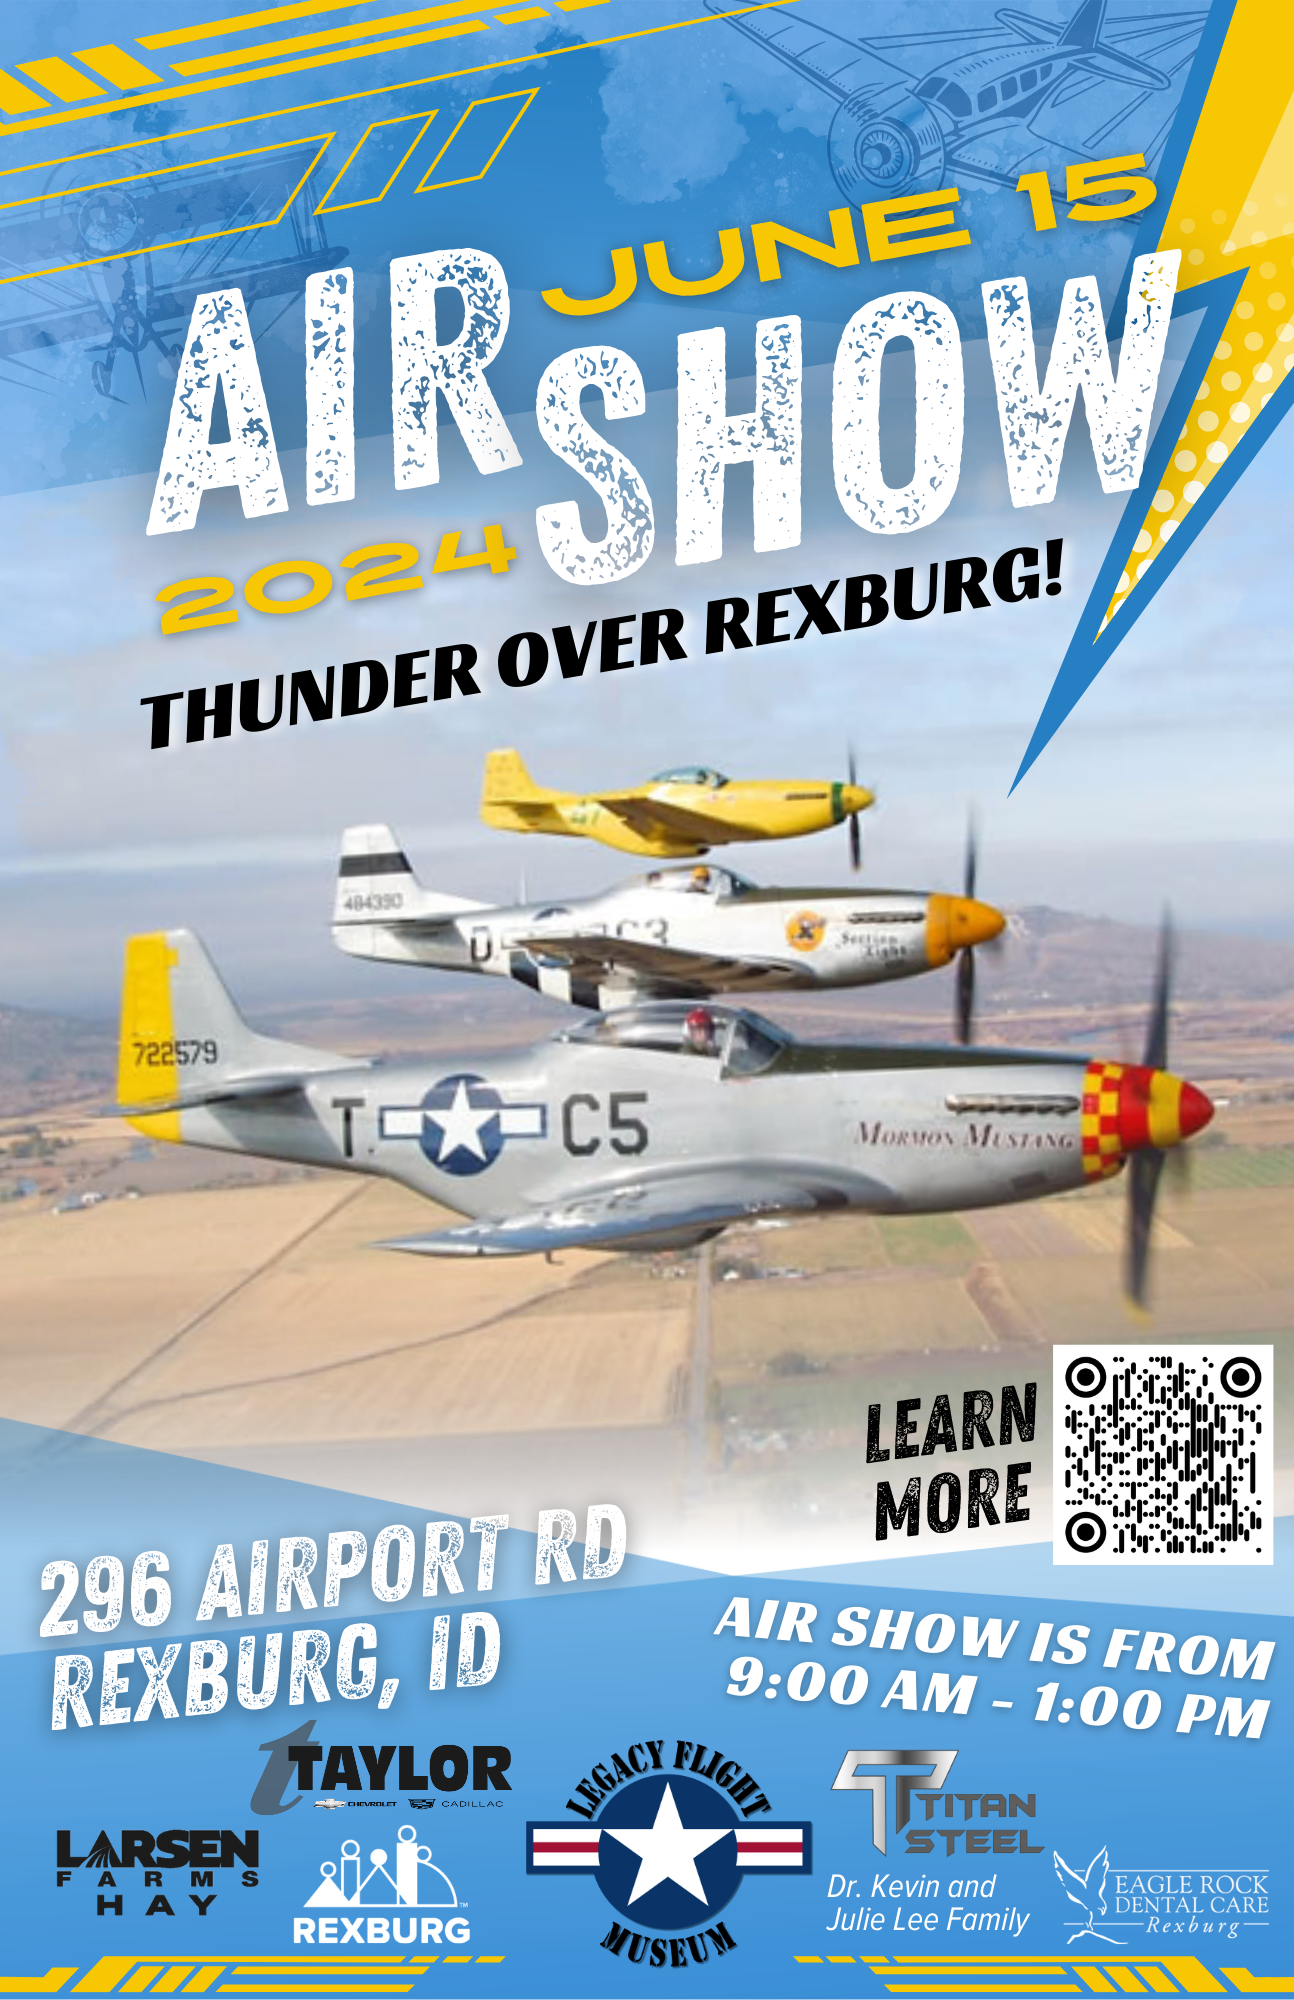 LFM 2024 Air Show Poster - 3 planes flying in the sky above Rexburg fields with text "June 15 9am - 1pm" sponsor logos and visual elements